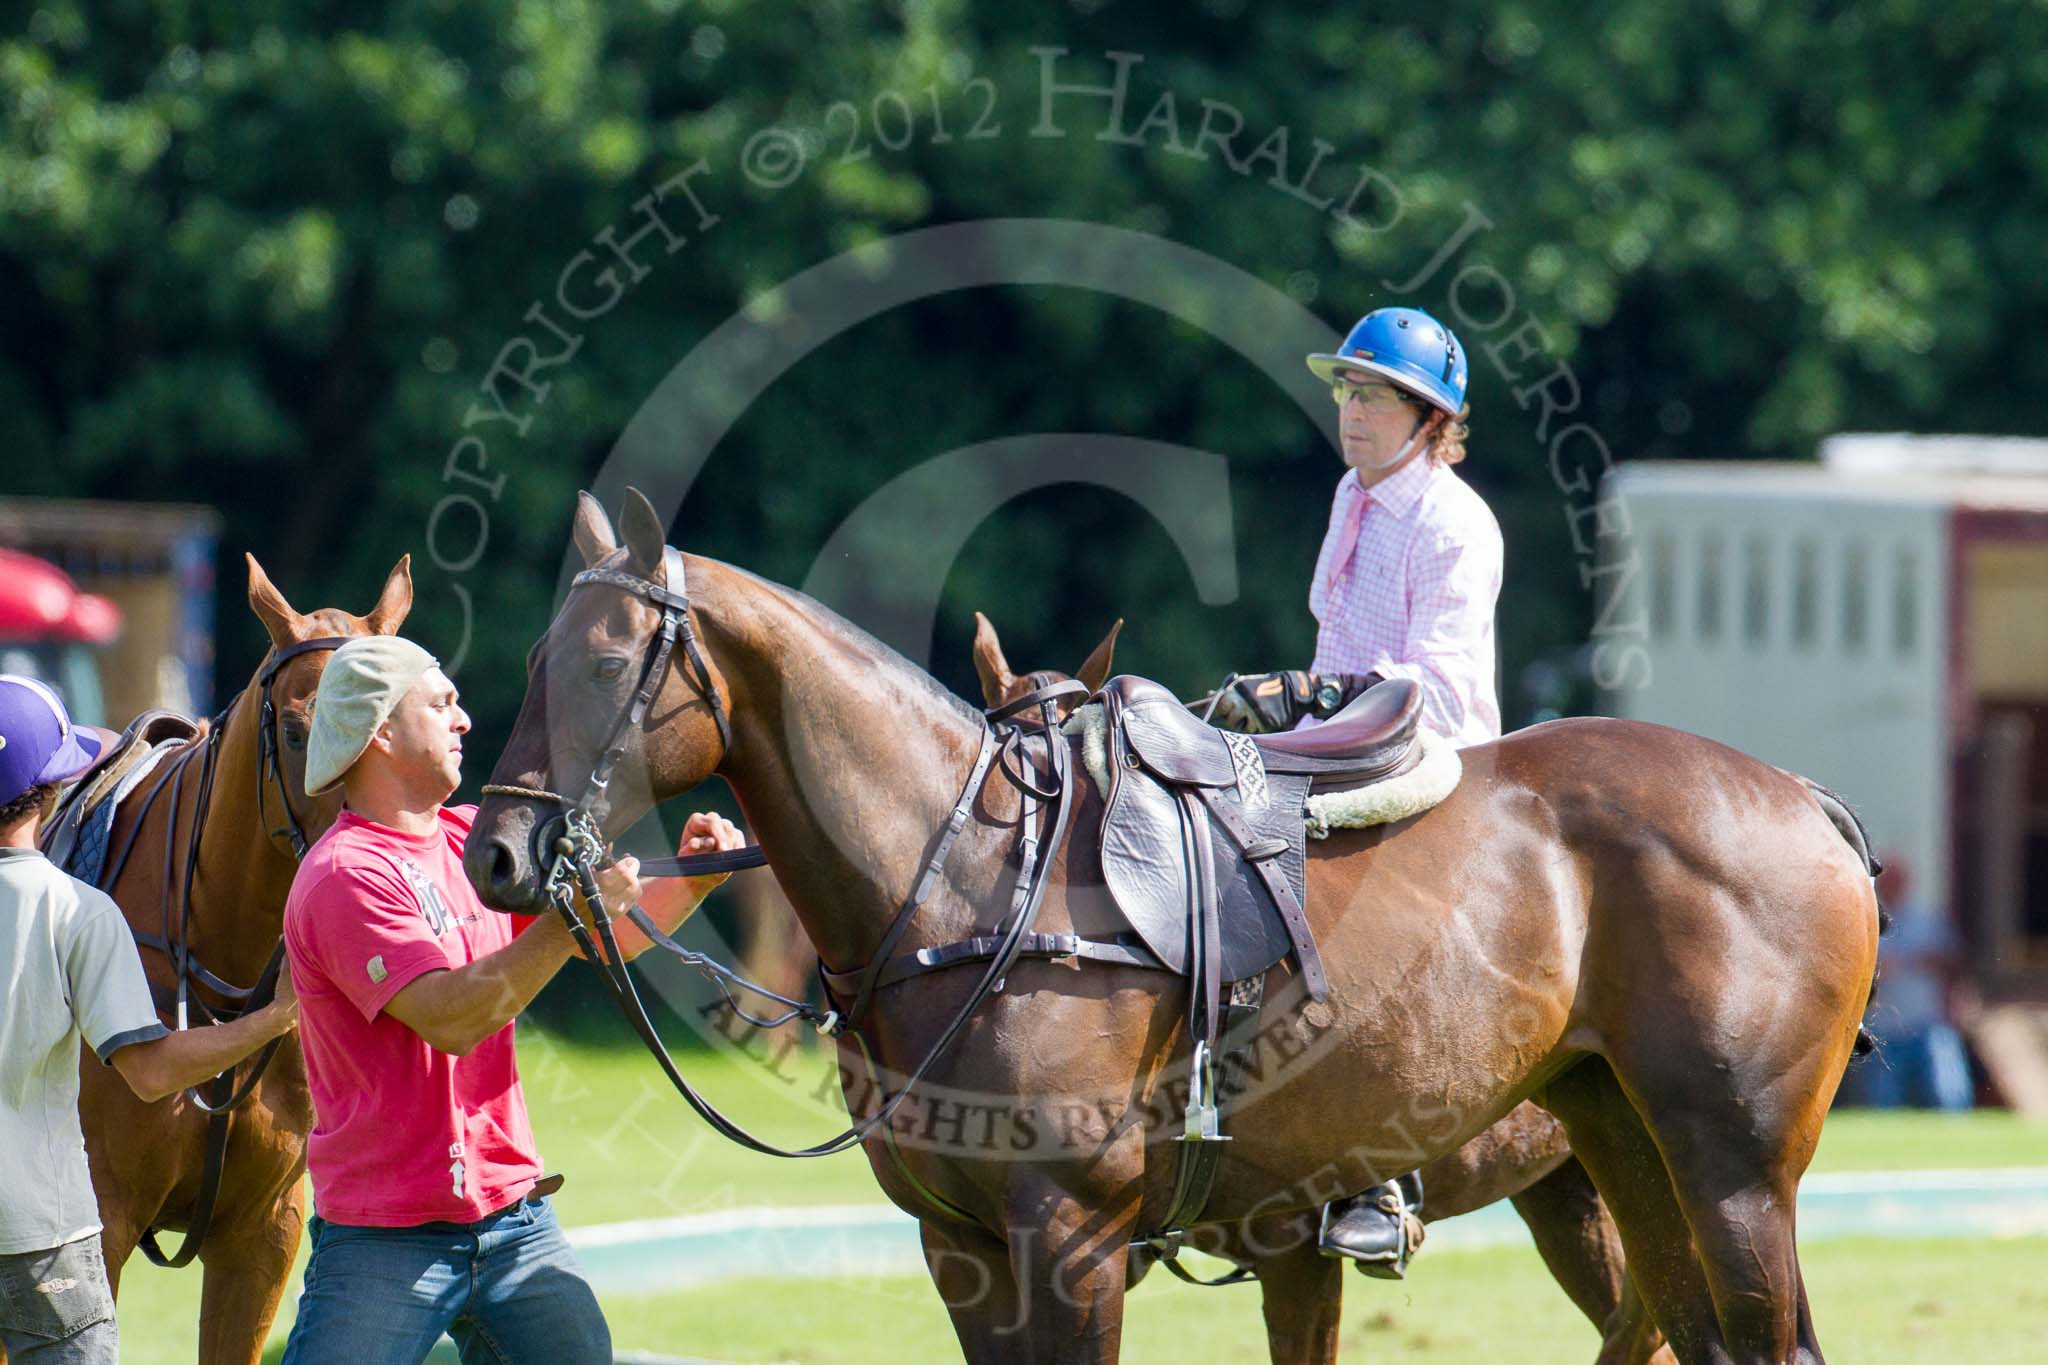 7th Heritage Polo Cup finals: Justo Saveedra and his groom..
Hurtwood Park Polo Club,
Ewhurst Green,
Surrey,
United Kingdom,
on 05 August 2012 at 15:38, image #181